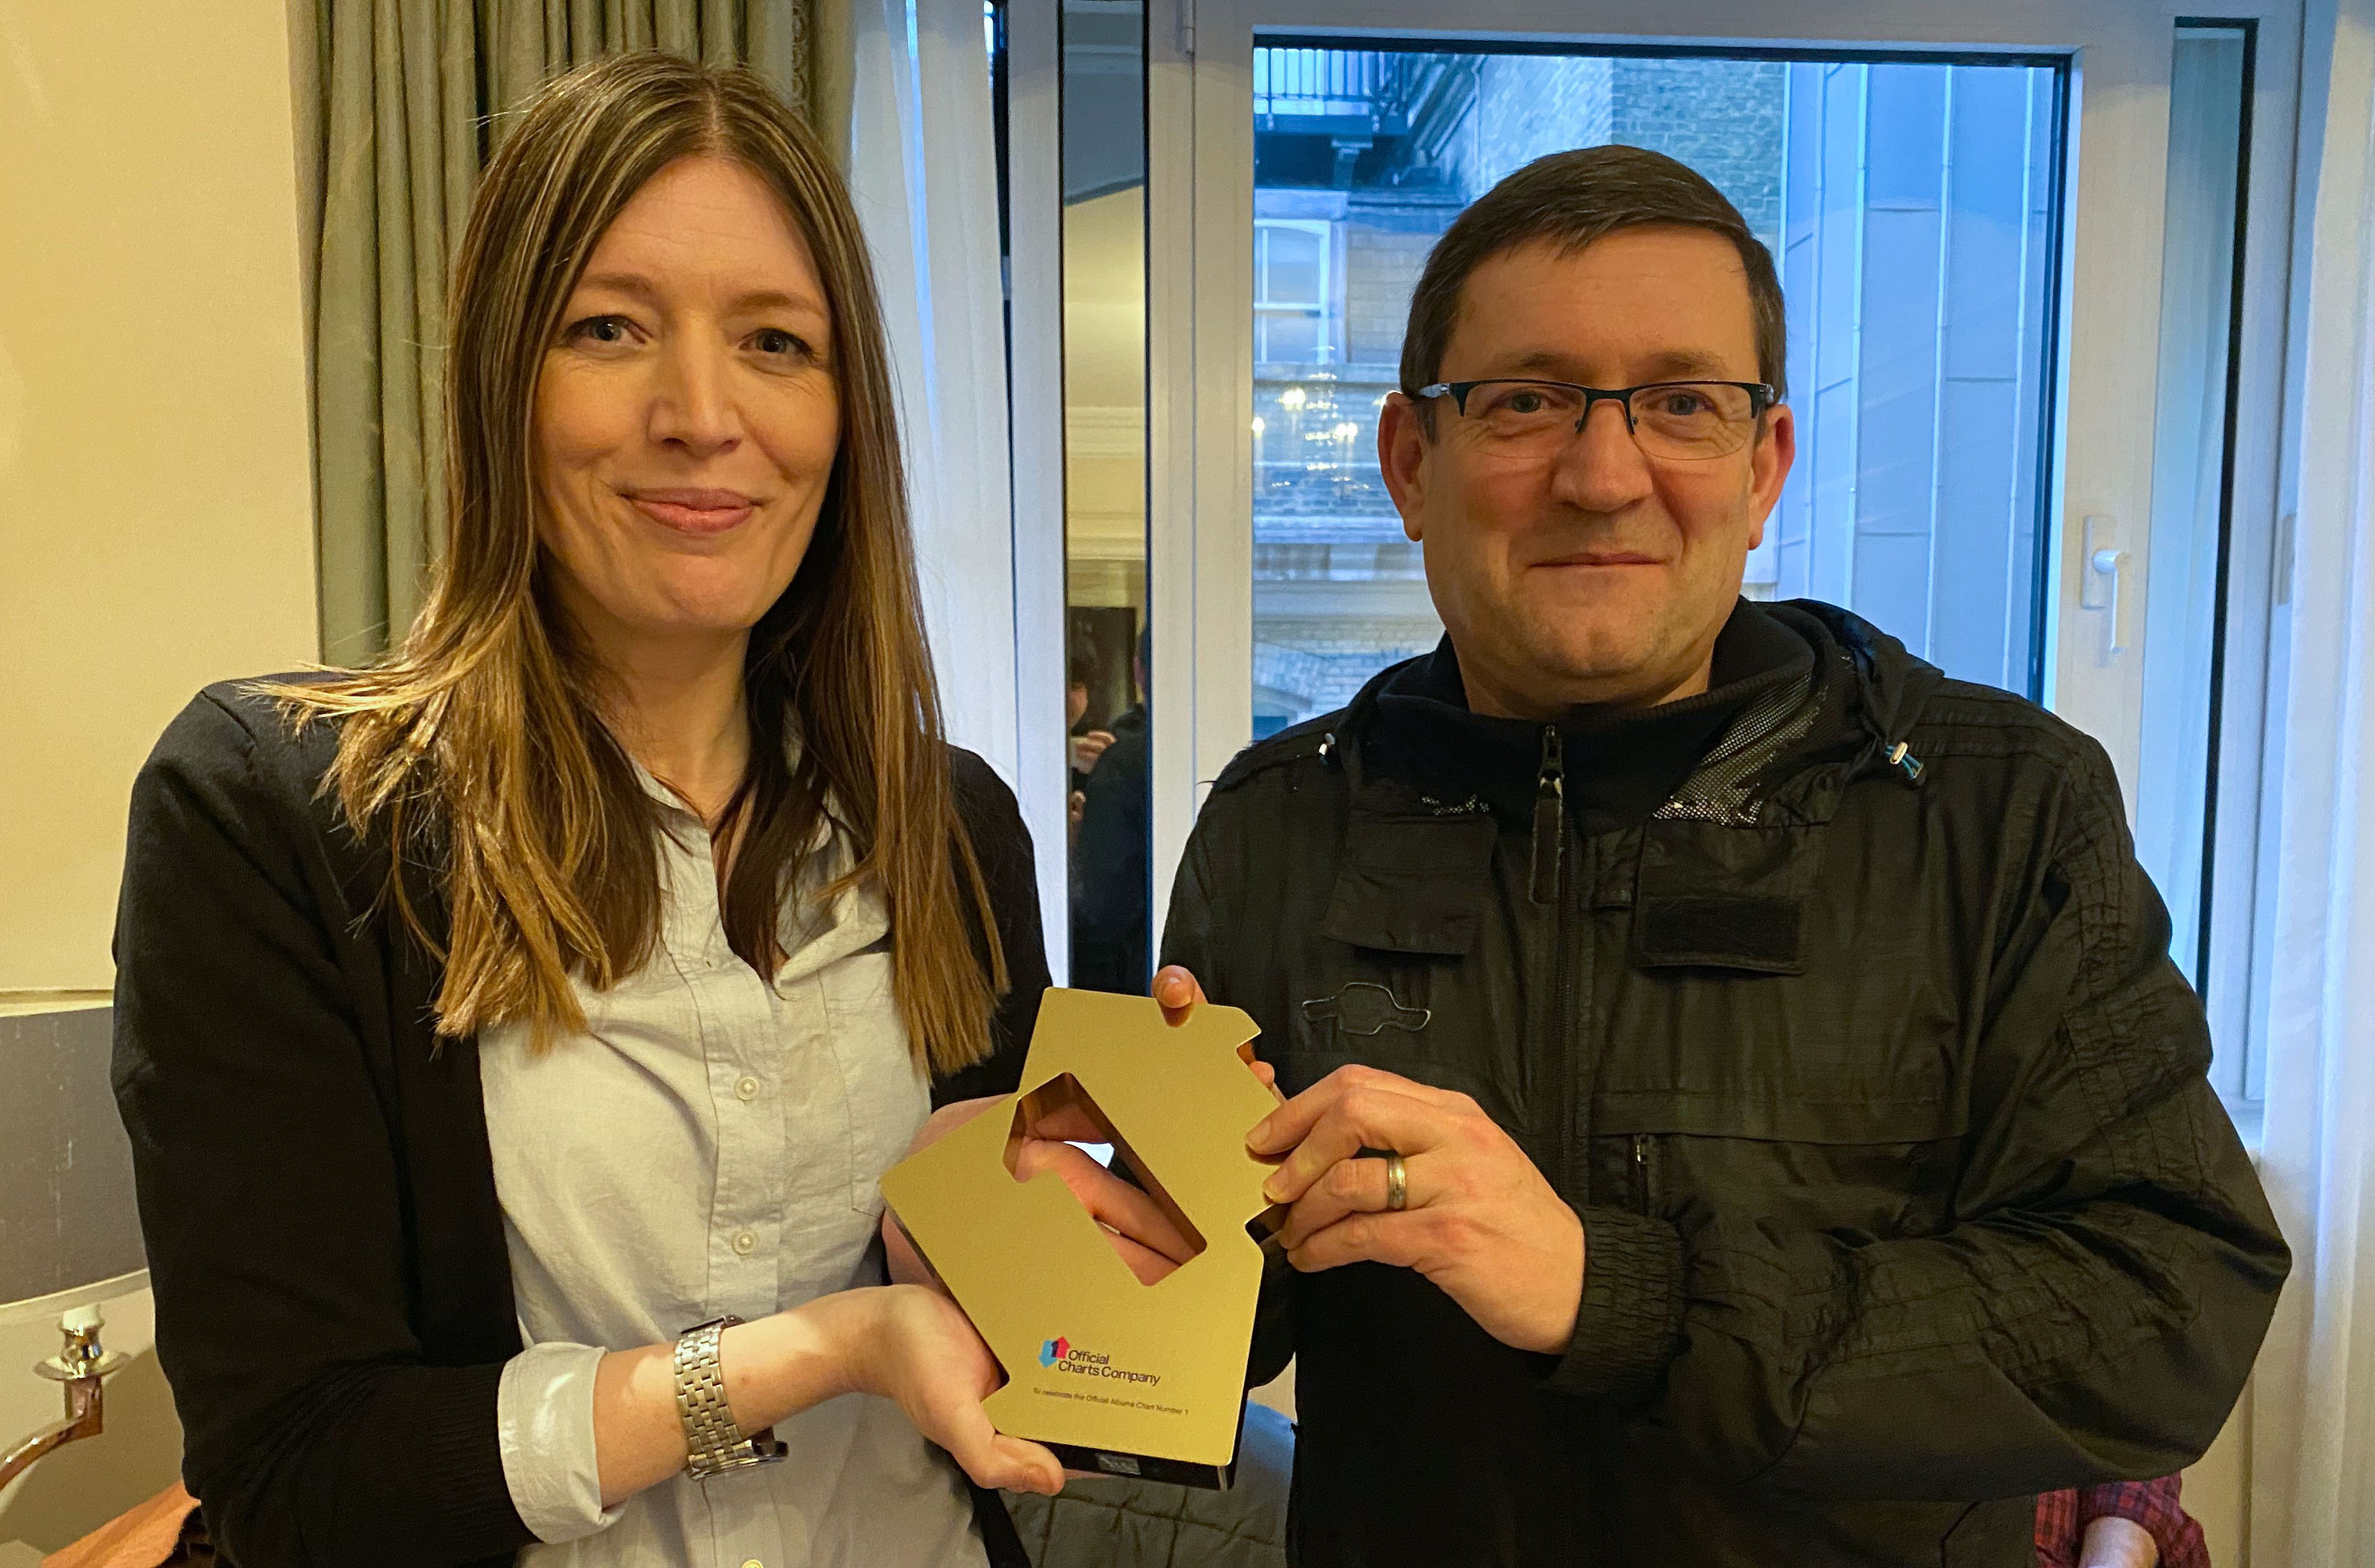 Paul Heaton and Jacqui Abbot Manchester Calling Number 1 Album Award 2